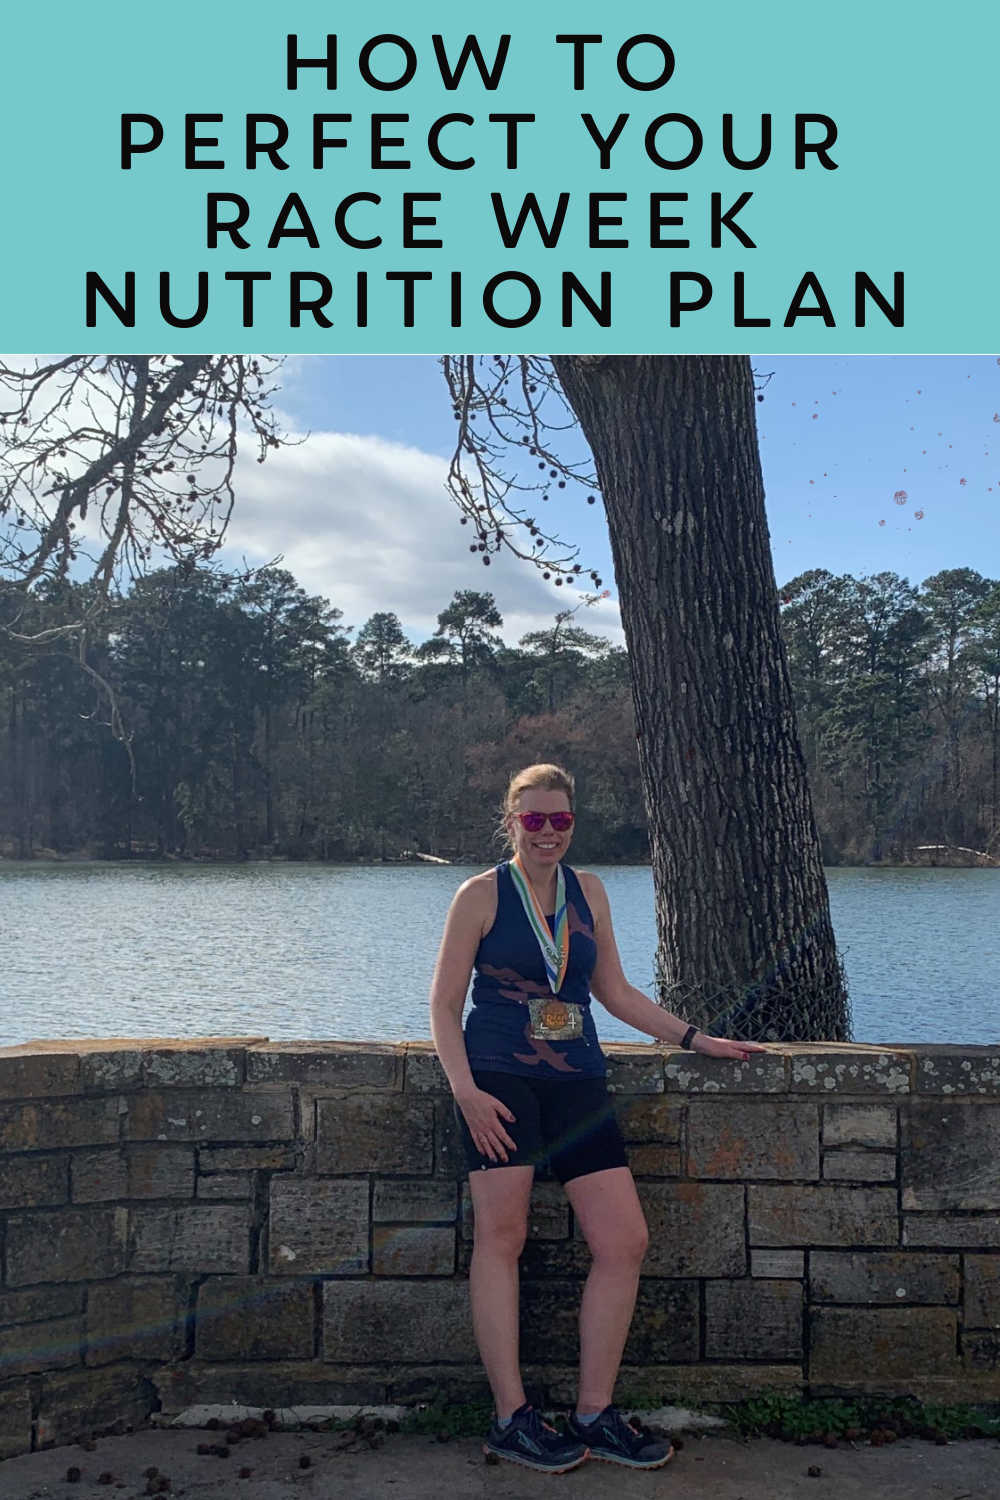 How to Perfect Your Race Week Nutrition Plan